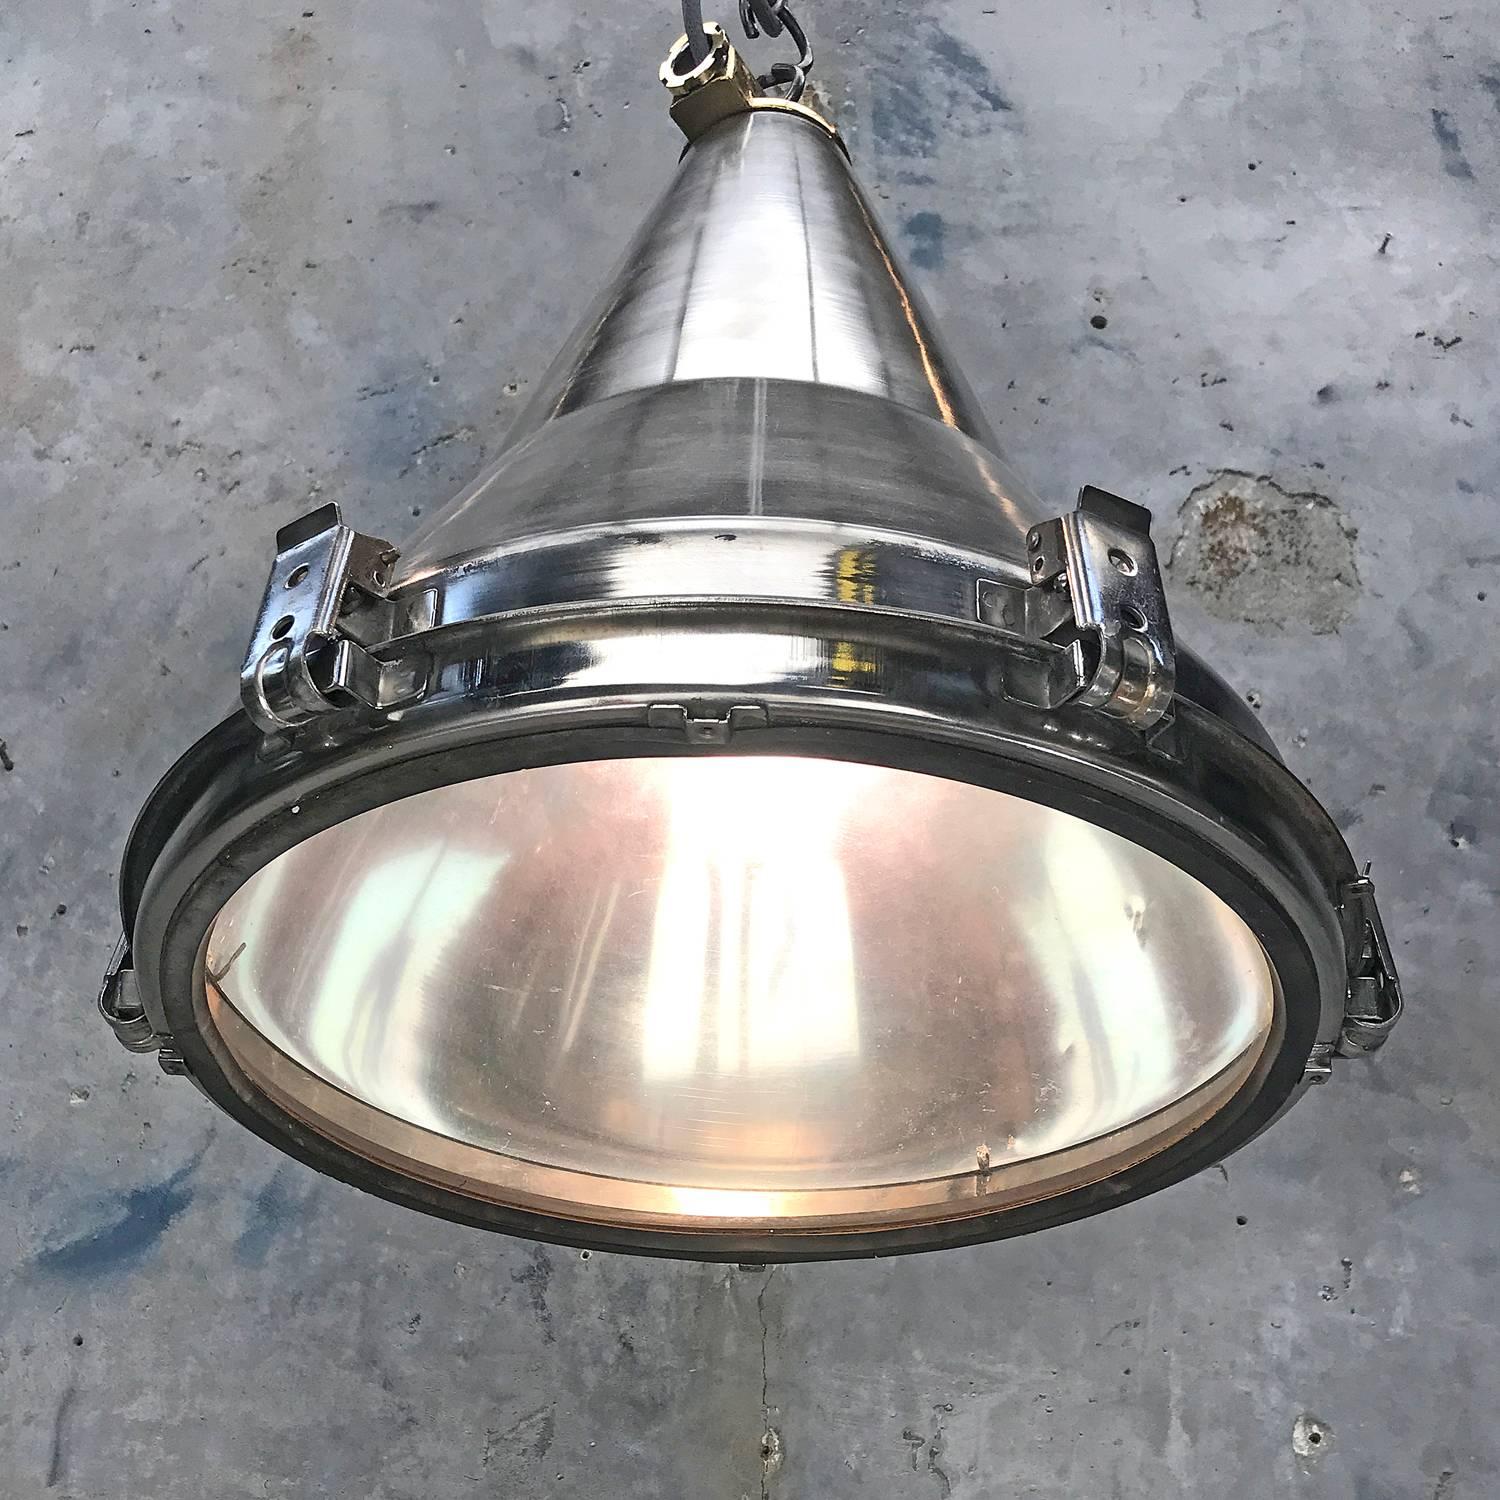 Late Century Korean Stainless Steel, Brass and Glass Conical Flood Light Pendant 1